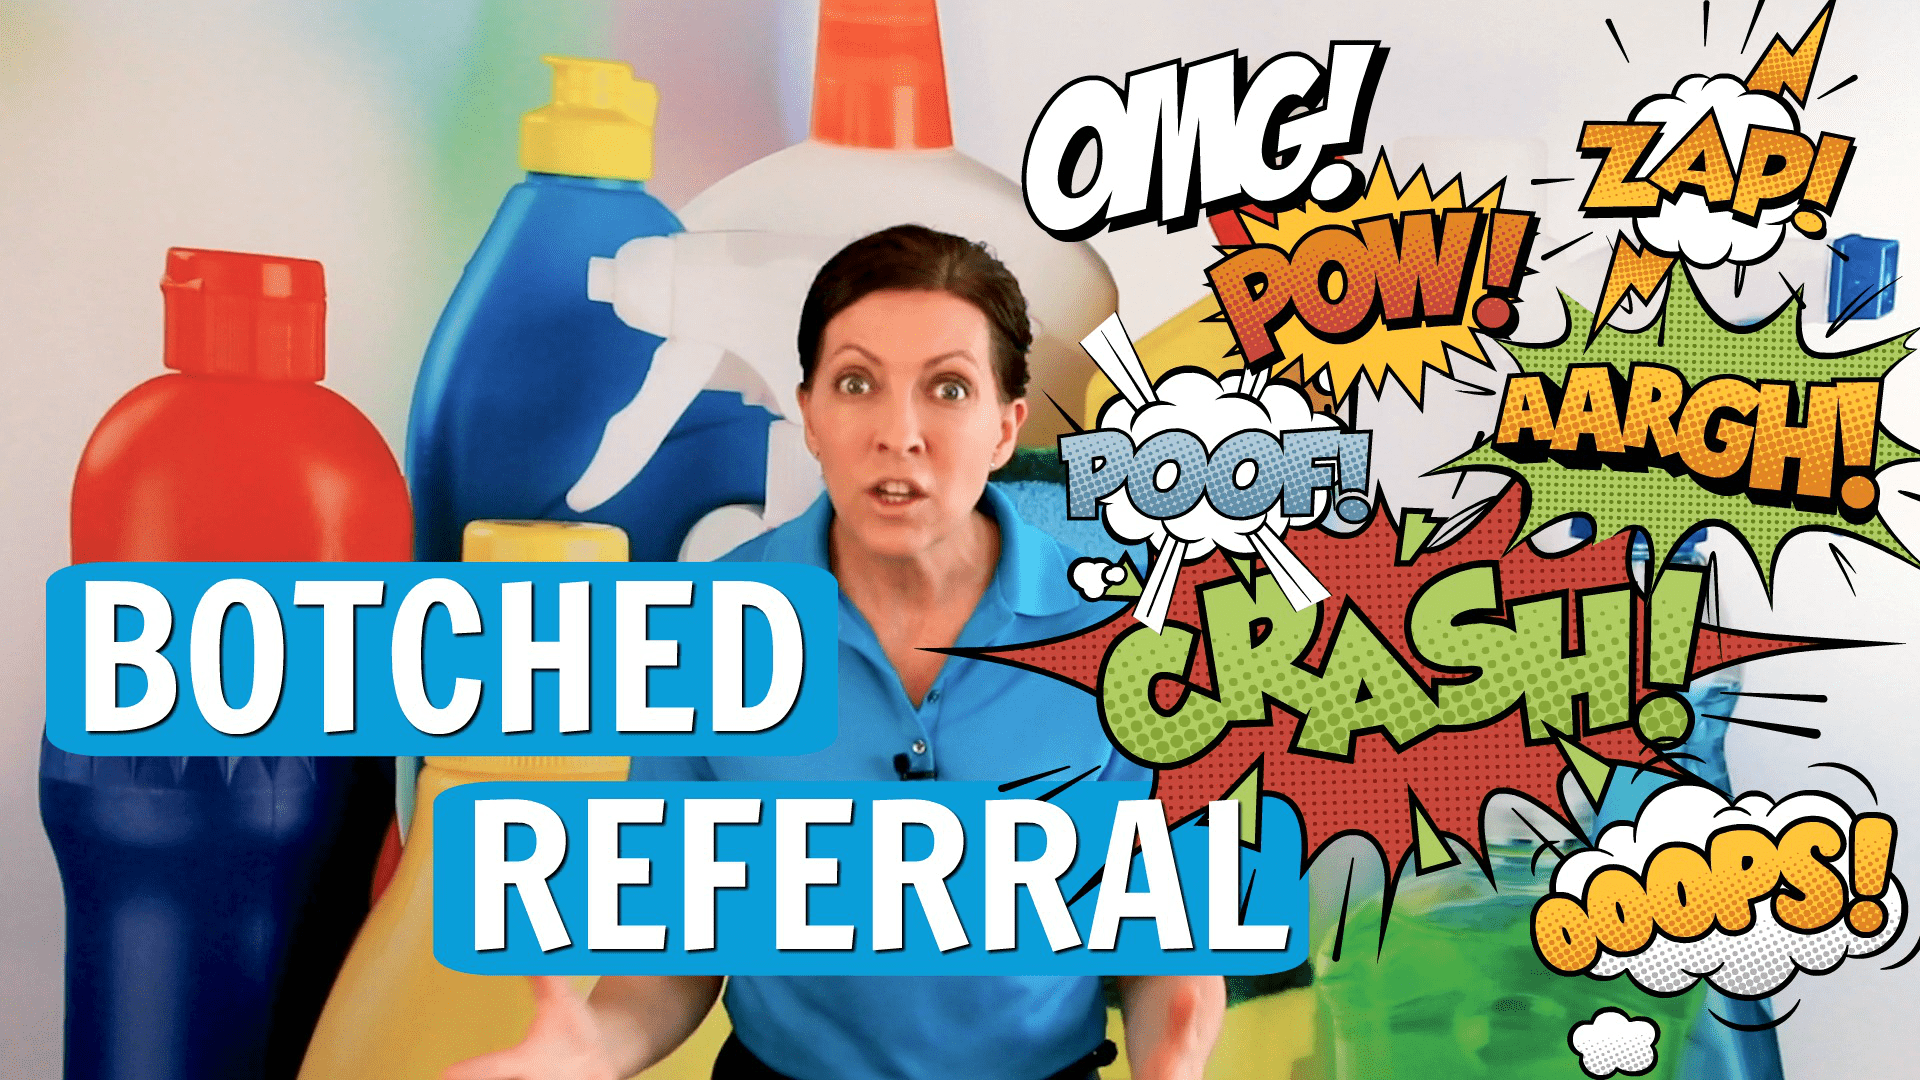 Ask a House Cleaner, Botched Referral, Savvy Cleaner - Featured